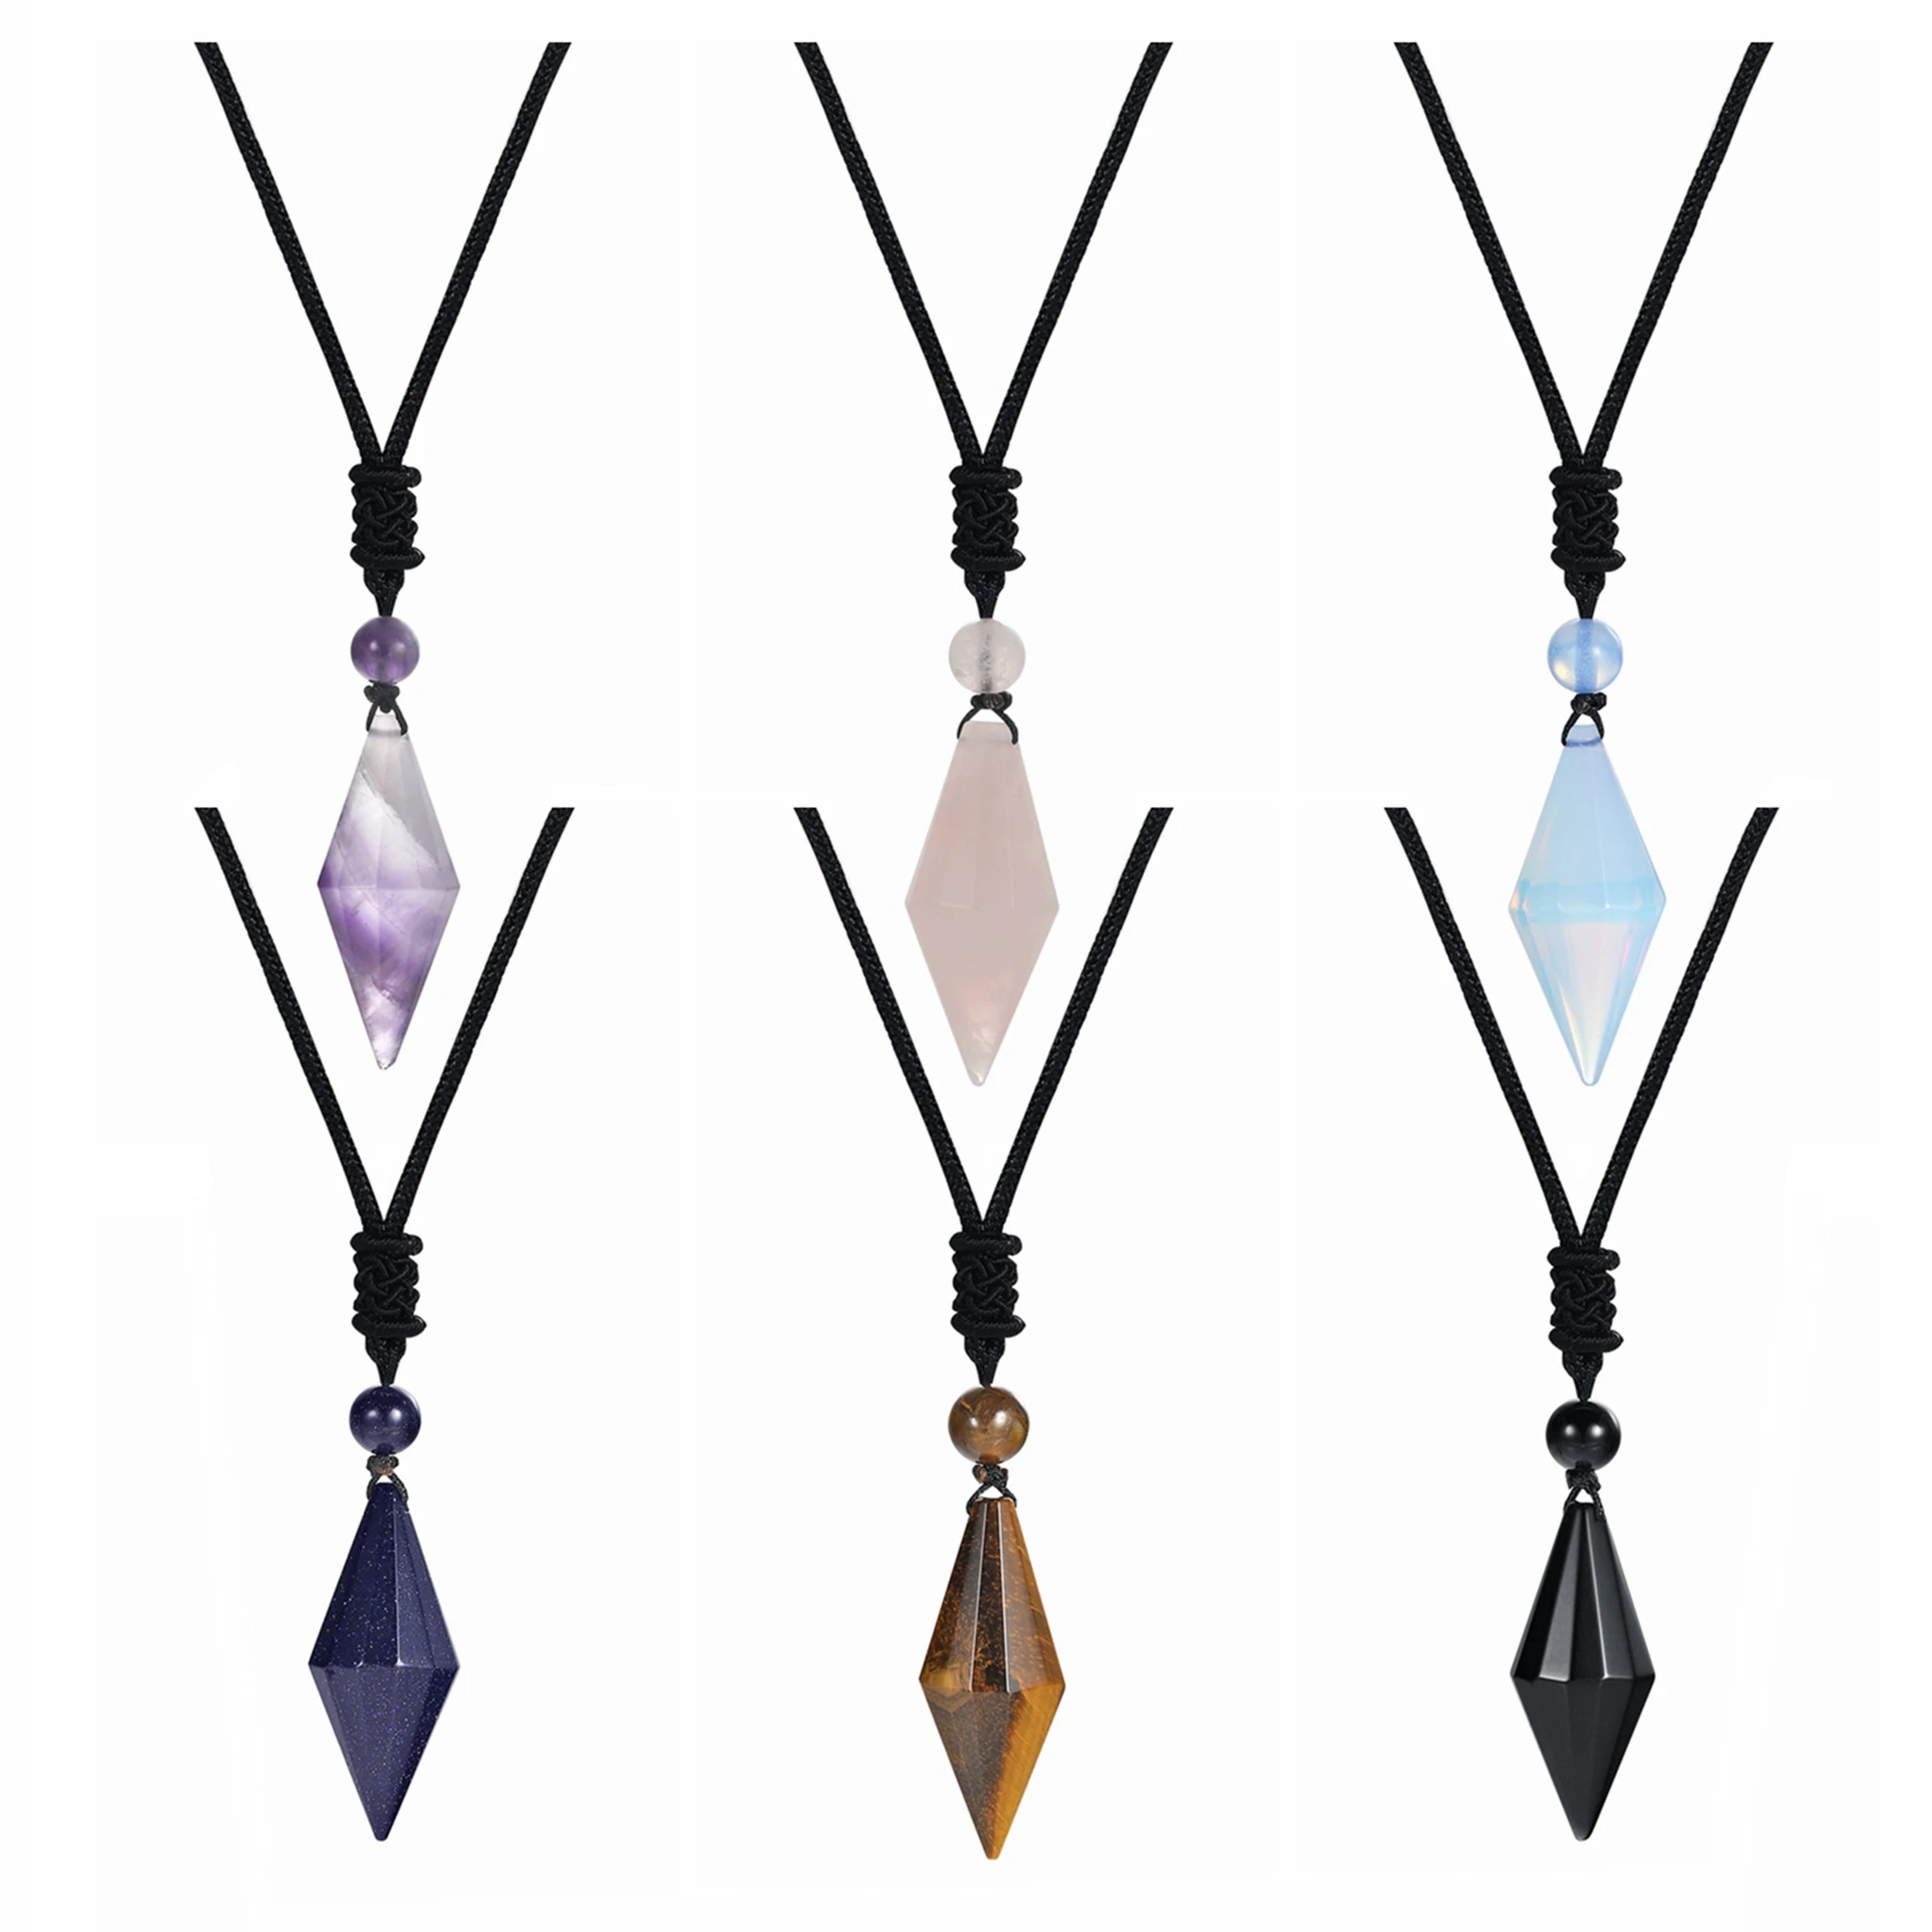 

Natural Crystal Quartz Hexagonal Cone Pendant Necklace for women Men Double Point Faceted Cut Healing Stone Jewelry, Picture shows